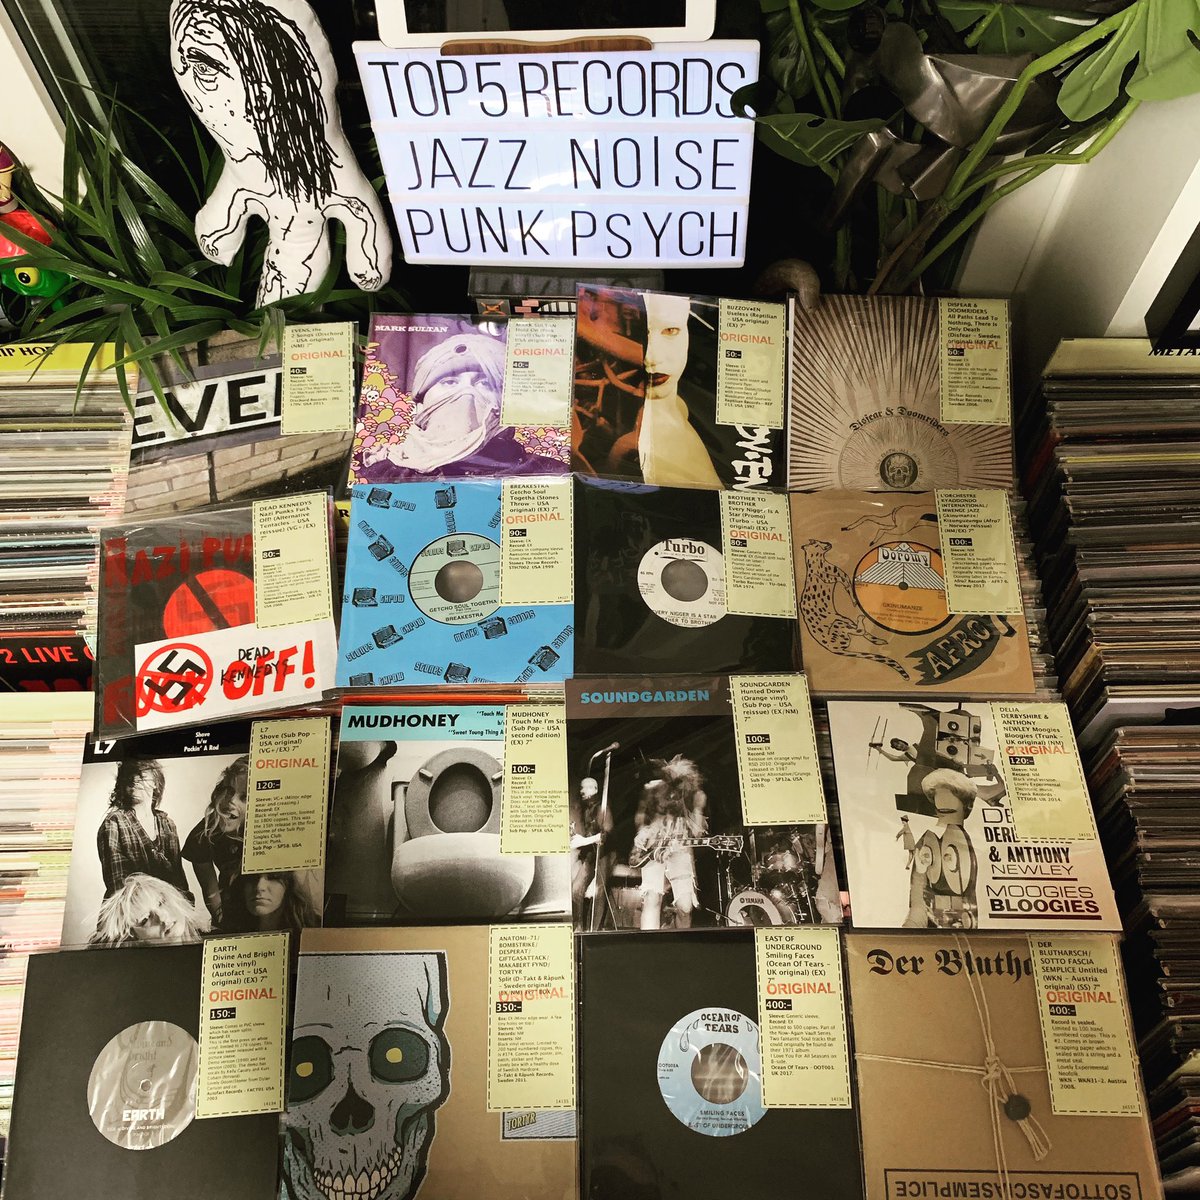 Lovely lot of 7”s in store now!
Including Der Blutharsch, East of Underground, Some Sub Pop classics, Delia Derbyshire and more.
topfiverecords.se
#derblutharsch #eastofunderground #deliaderbyshire #L7 #breakestra #marksultan #buzzoven #disfear #records #vinyl #LPs #45s